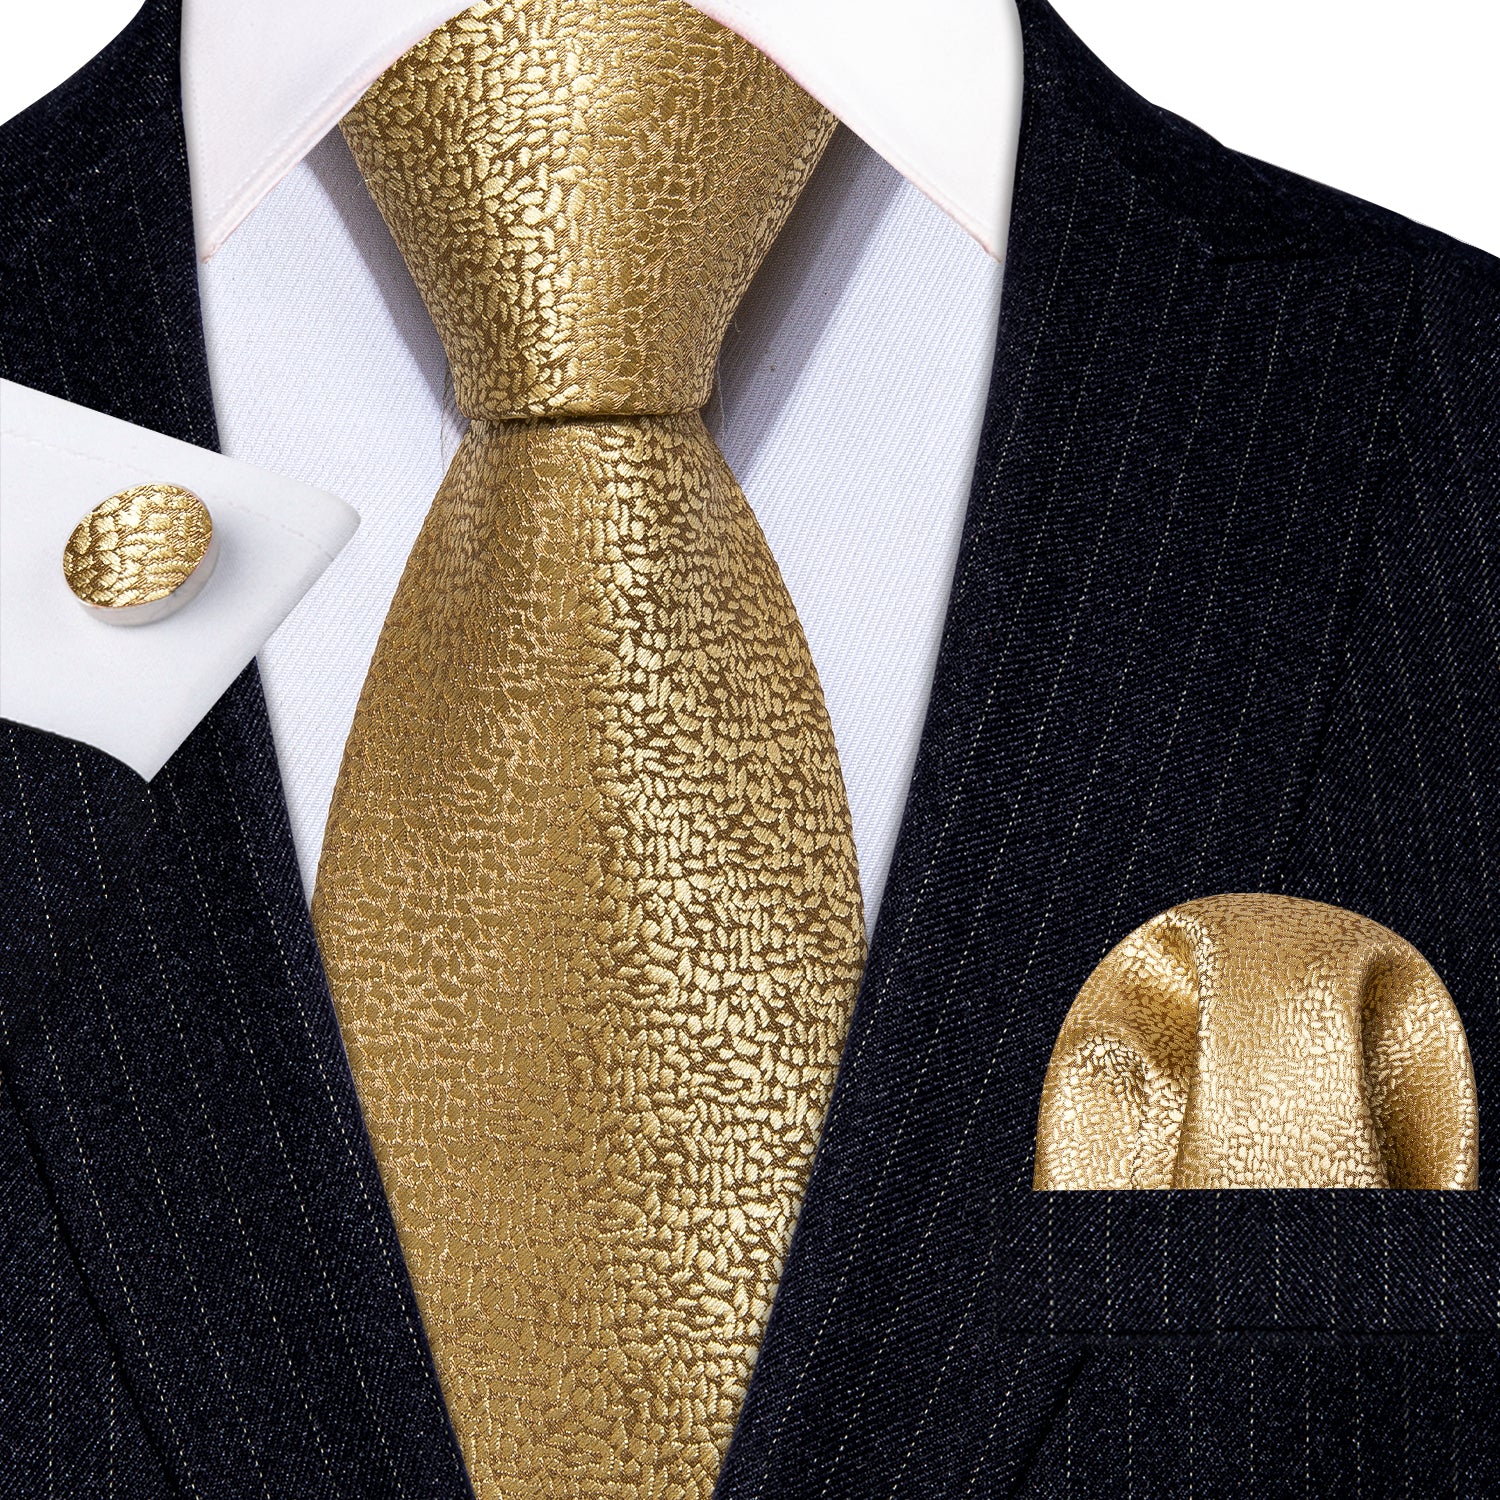 Barry.wang Gold Tie Champagne Solid Tie Pocket Square Cufflinks Set